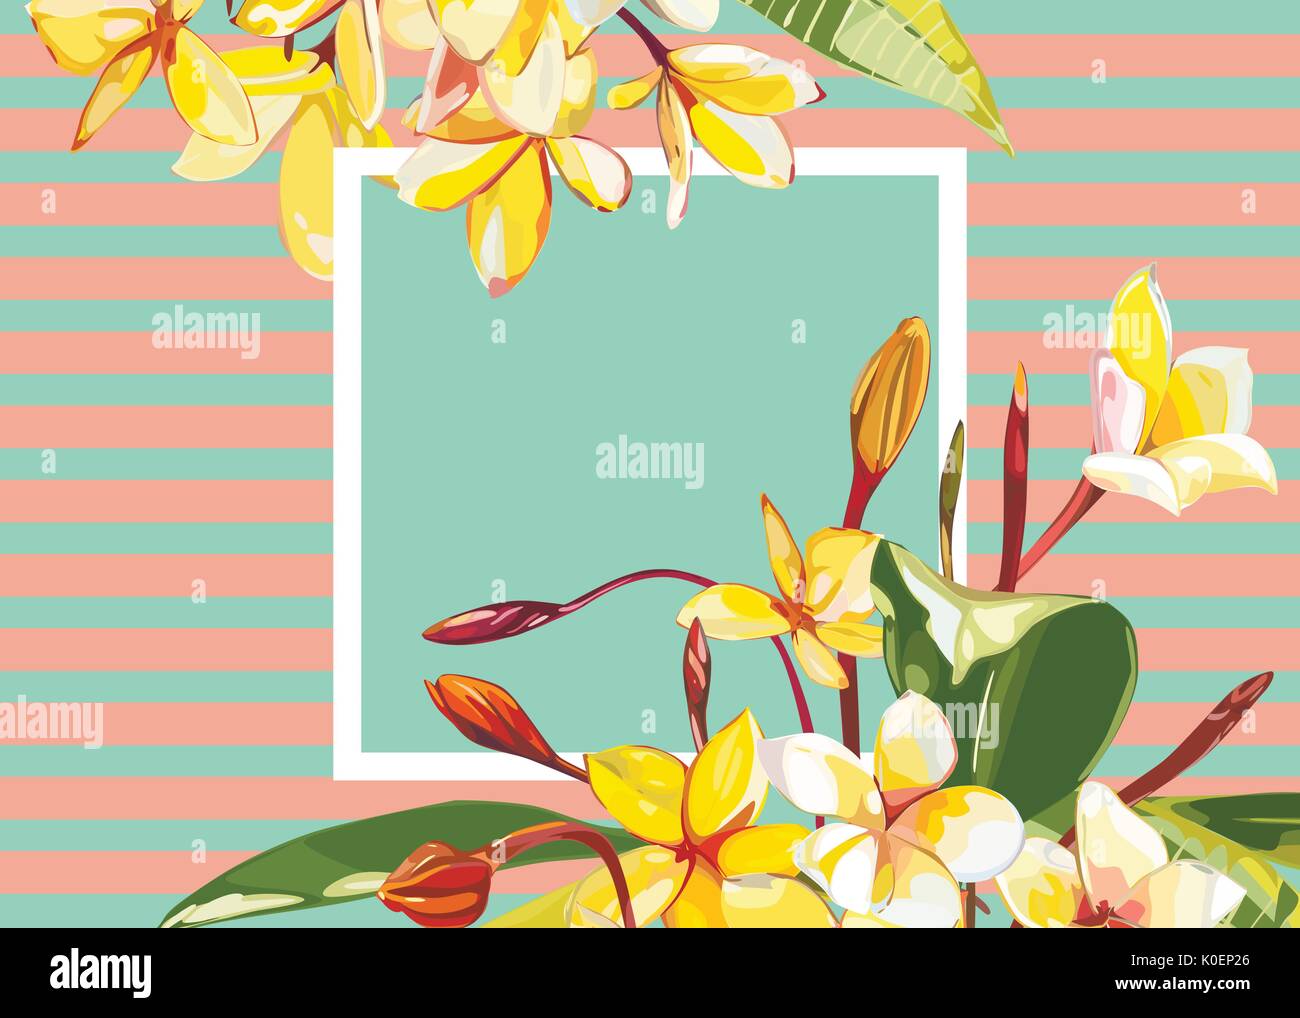 Floral frame with Plumeria flowers on light background. Greeting card or template for wedding's Day design. EPS 10 Stock Vector